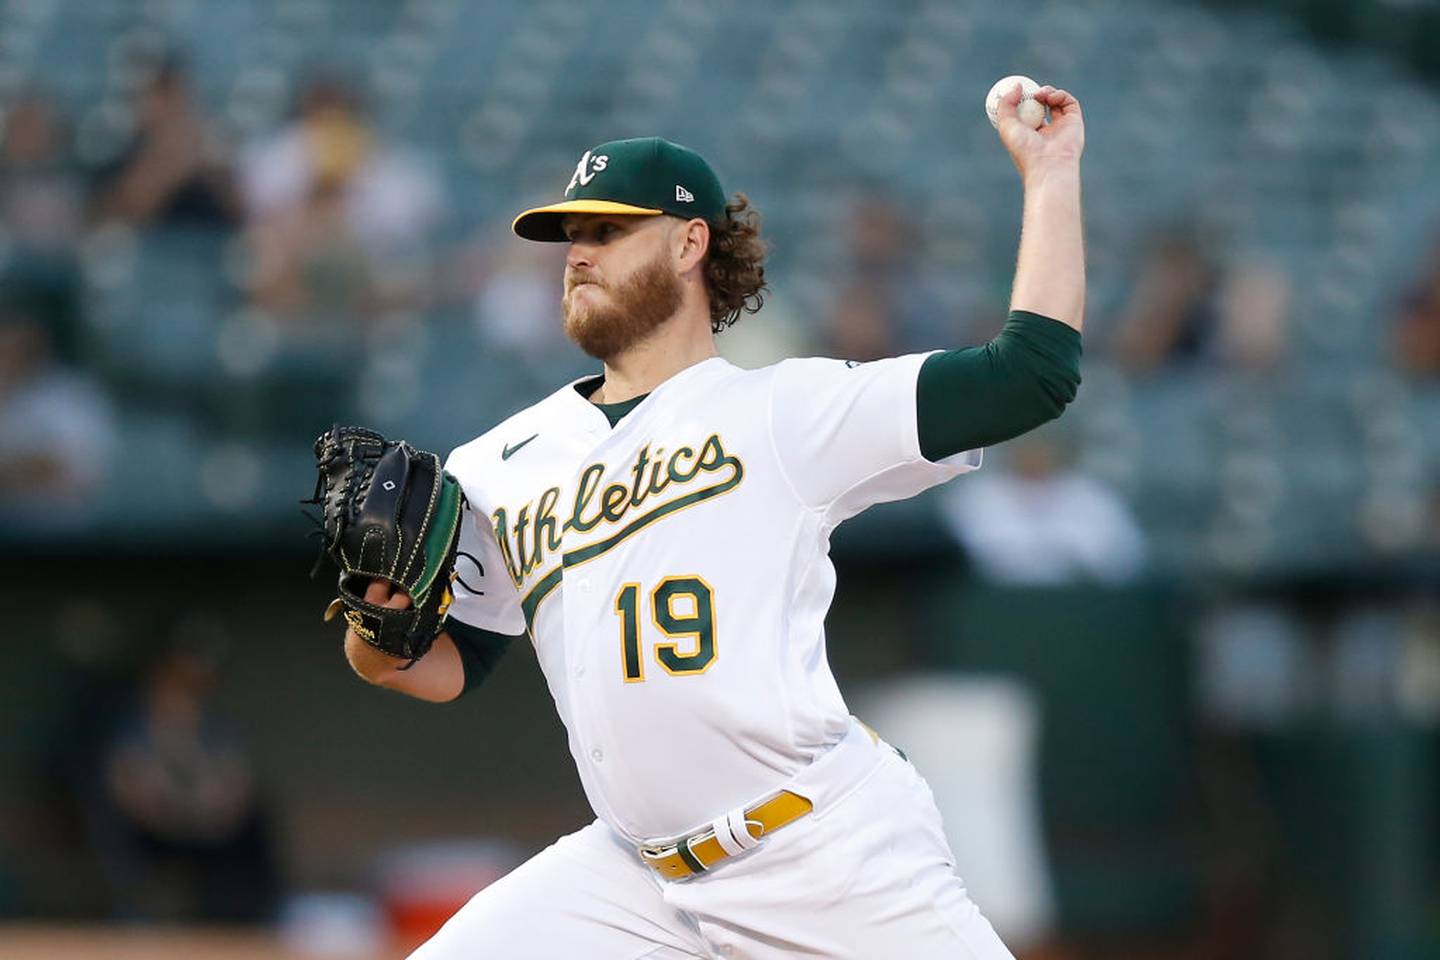 OAKLAND, CALIFORNIA - SEPTEMBER 06: Cole Irvin #19 of the Oakland Athletics pitches in the top of the first inning against the Atlanta Braves at RingCentral Coliseum on September 06, 2022 in Oakland, California.